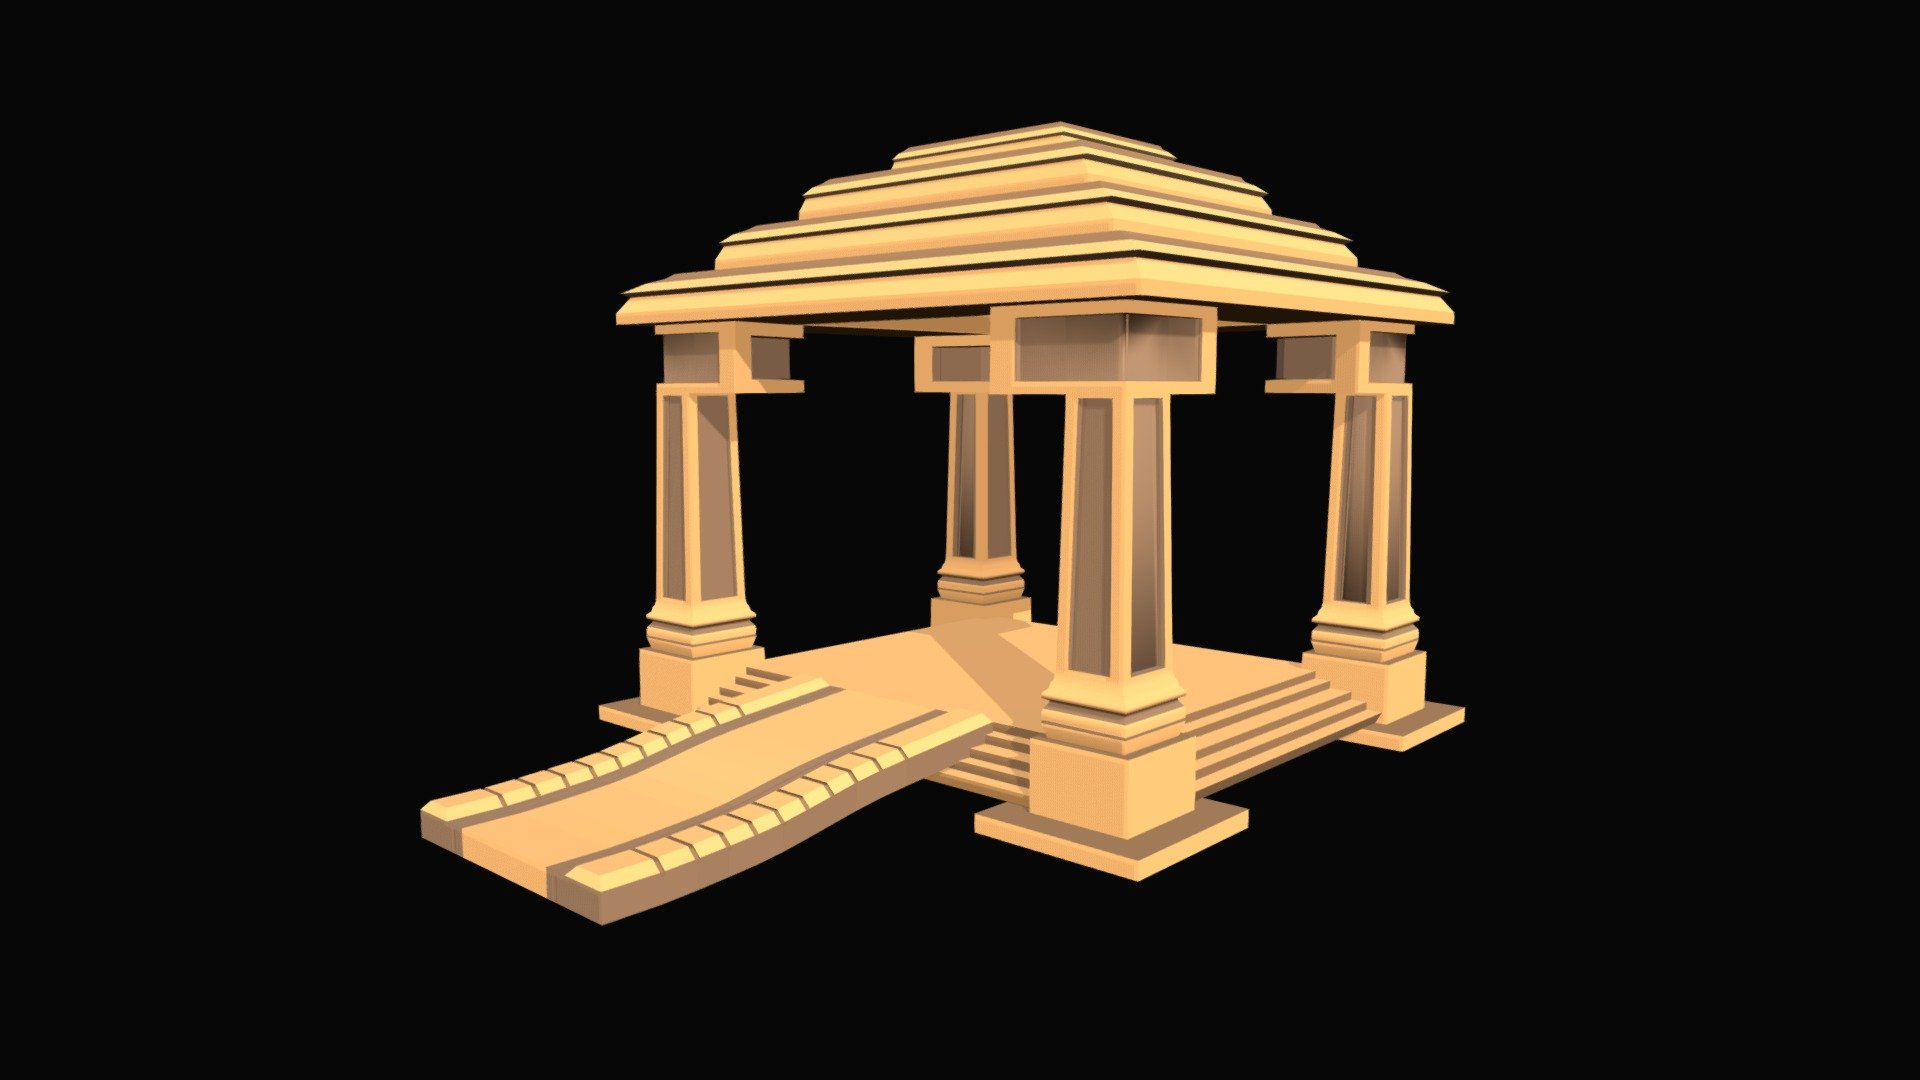 3d Building with pillars - style and decorate, modeling by blender - 3d Building with pillars - 3D model by RiverofCreative 3d model